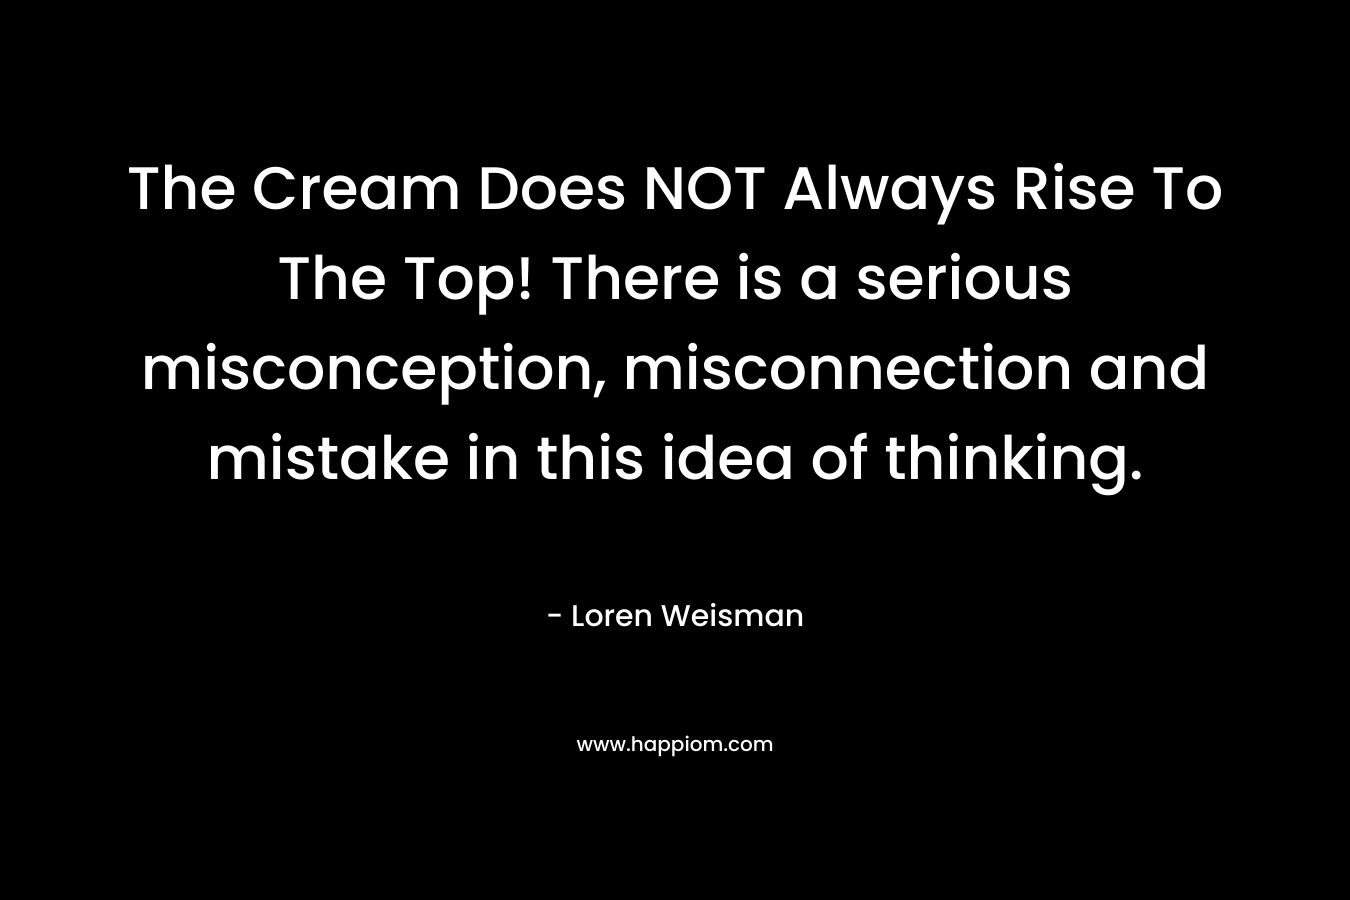 The Cream Does NOT Always Rise To The Top! There is a serious misconception, misconnection and mistake in this idea of thinking.